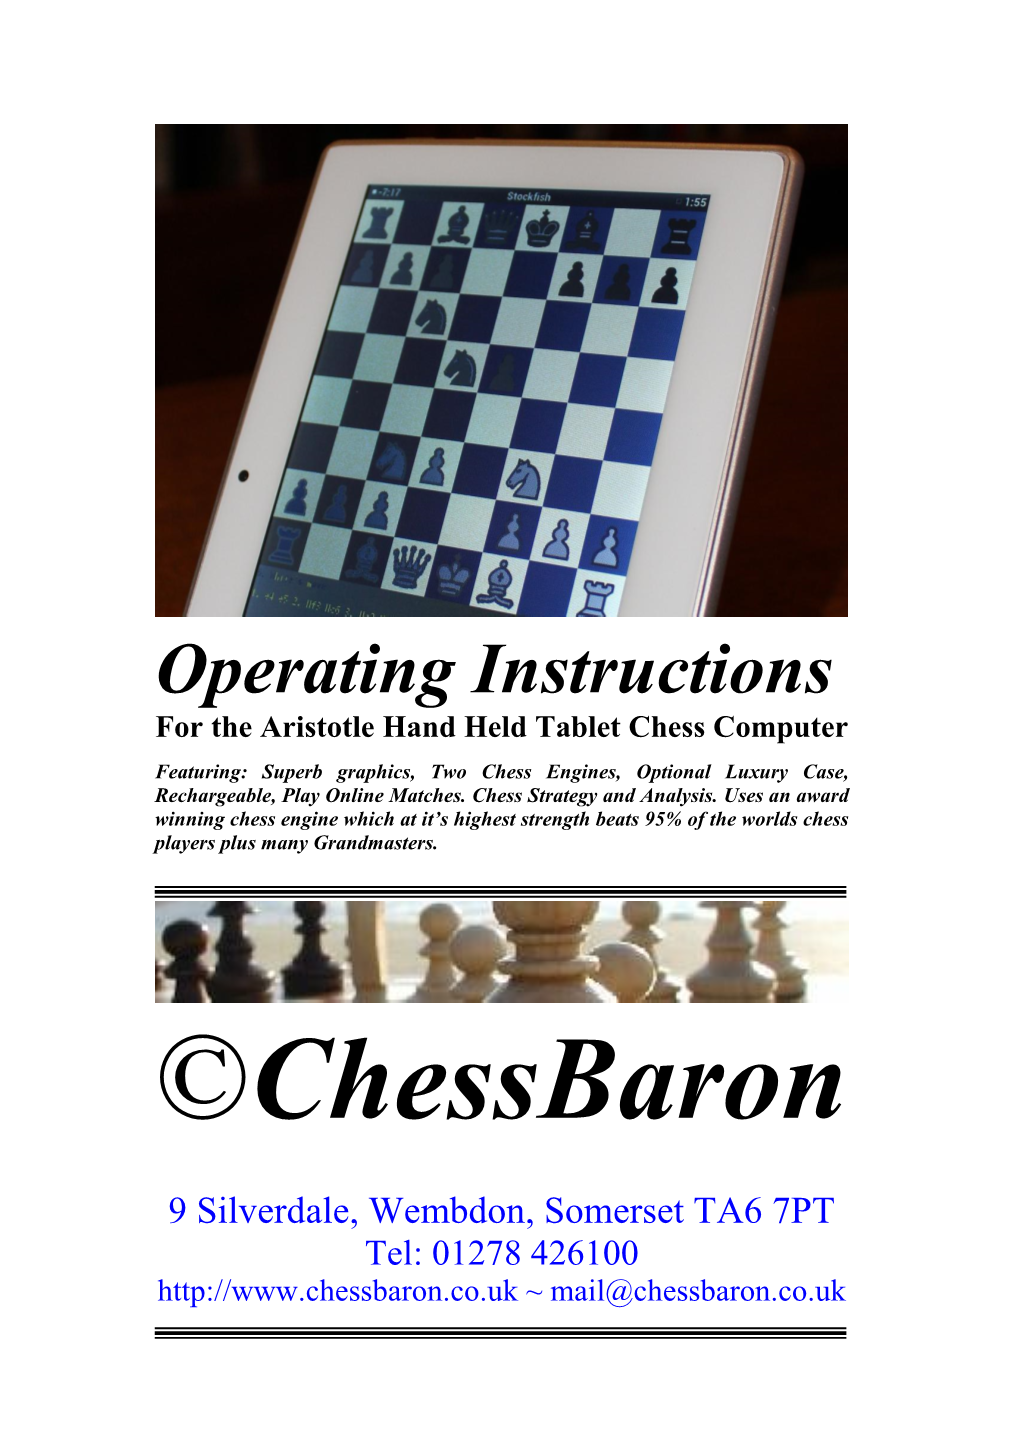 Operating Instructions for the Aristotle Hand Held Tablet Chess Computer